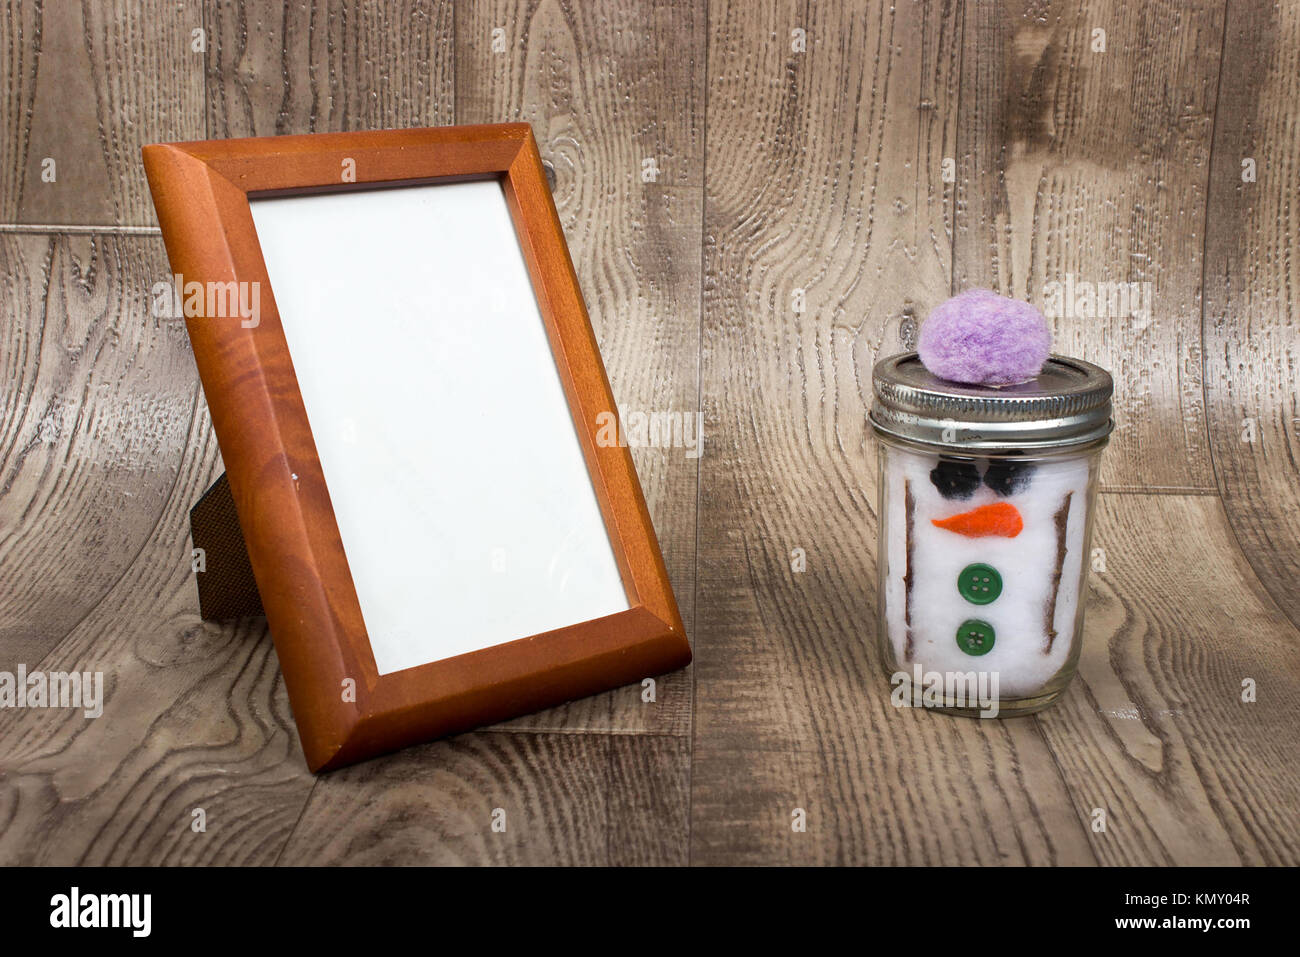 background of empty wooden  picture frame setting a wooden shelf with a hand crafted snowman made with twigs, buttons, and cotton balls in a jar. Stock Photo